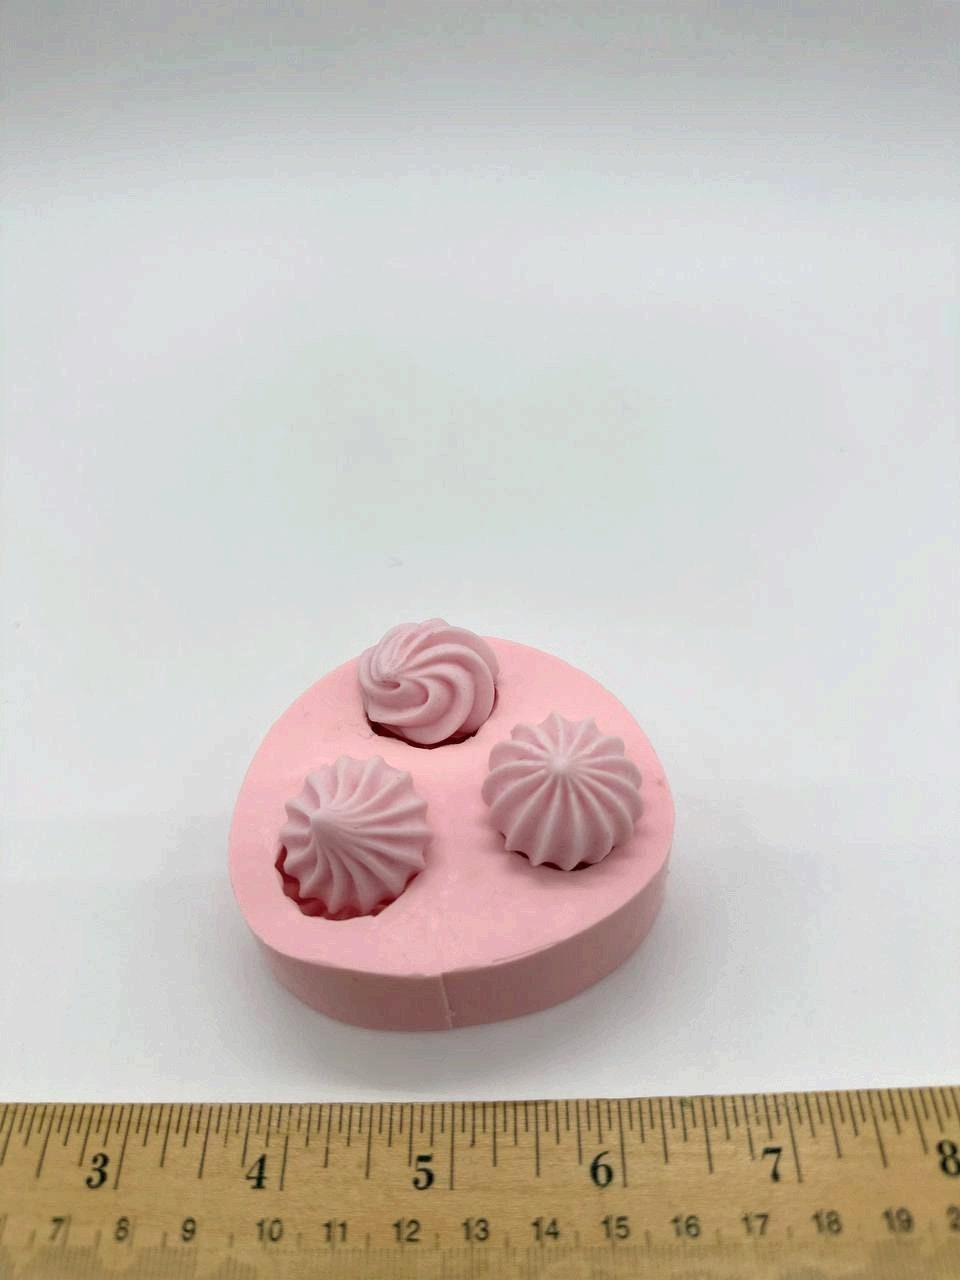 Irises Flower Silicone Soap Molds for Soap Making made of High